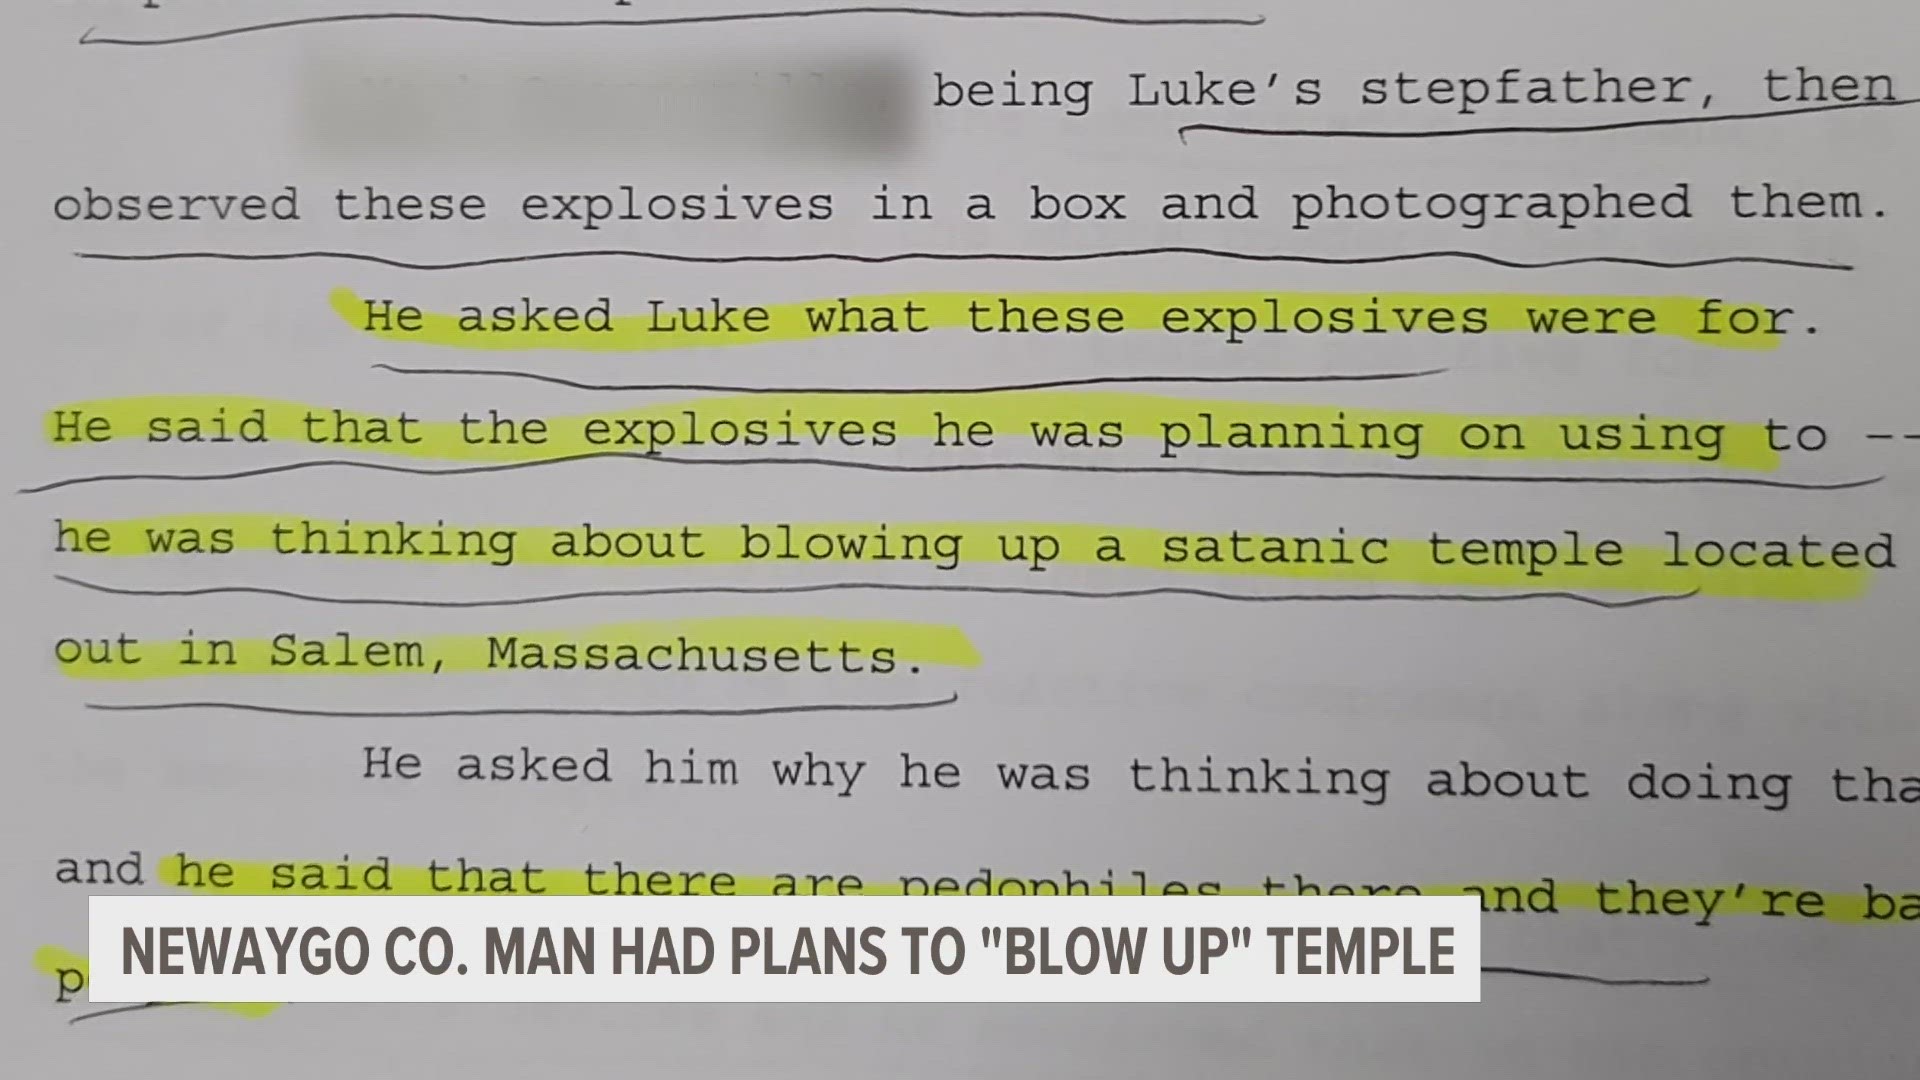 Court documents show that Luke Terpstra had tried to throw away evidence of homemade explosives, with police saying some were wrapped in shrapnel and ammunition.